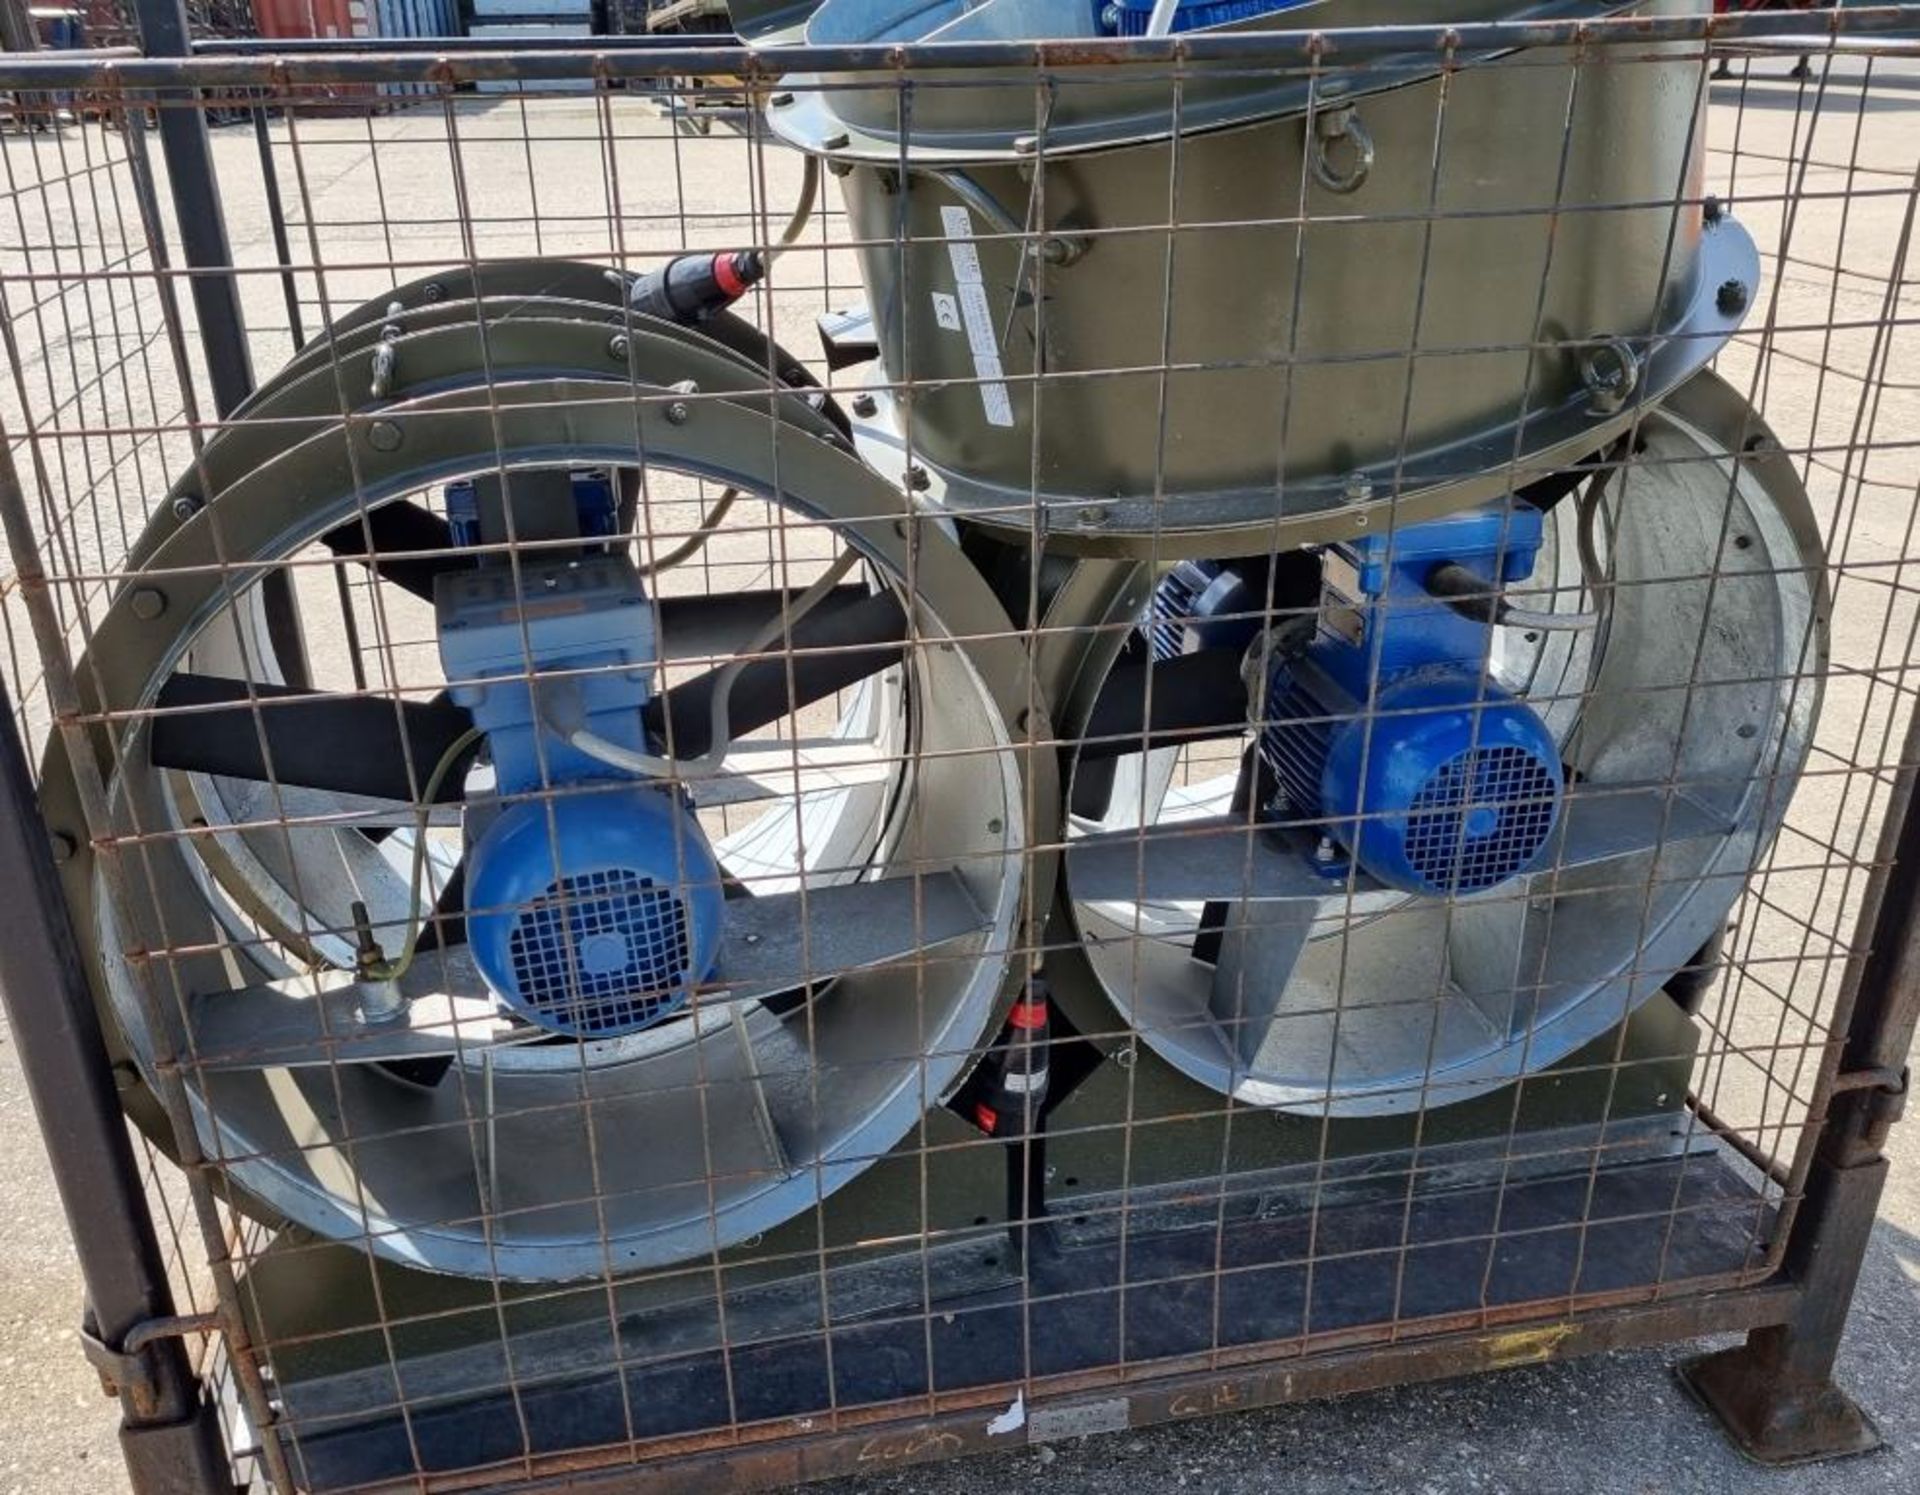 5x RUBB / ED / 332 industrial fan units - 415V / 3ph / 50hz with ATX PCX connectors with WEG motors - Image 5 of 9